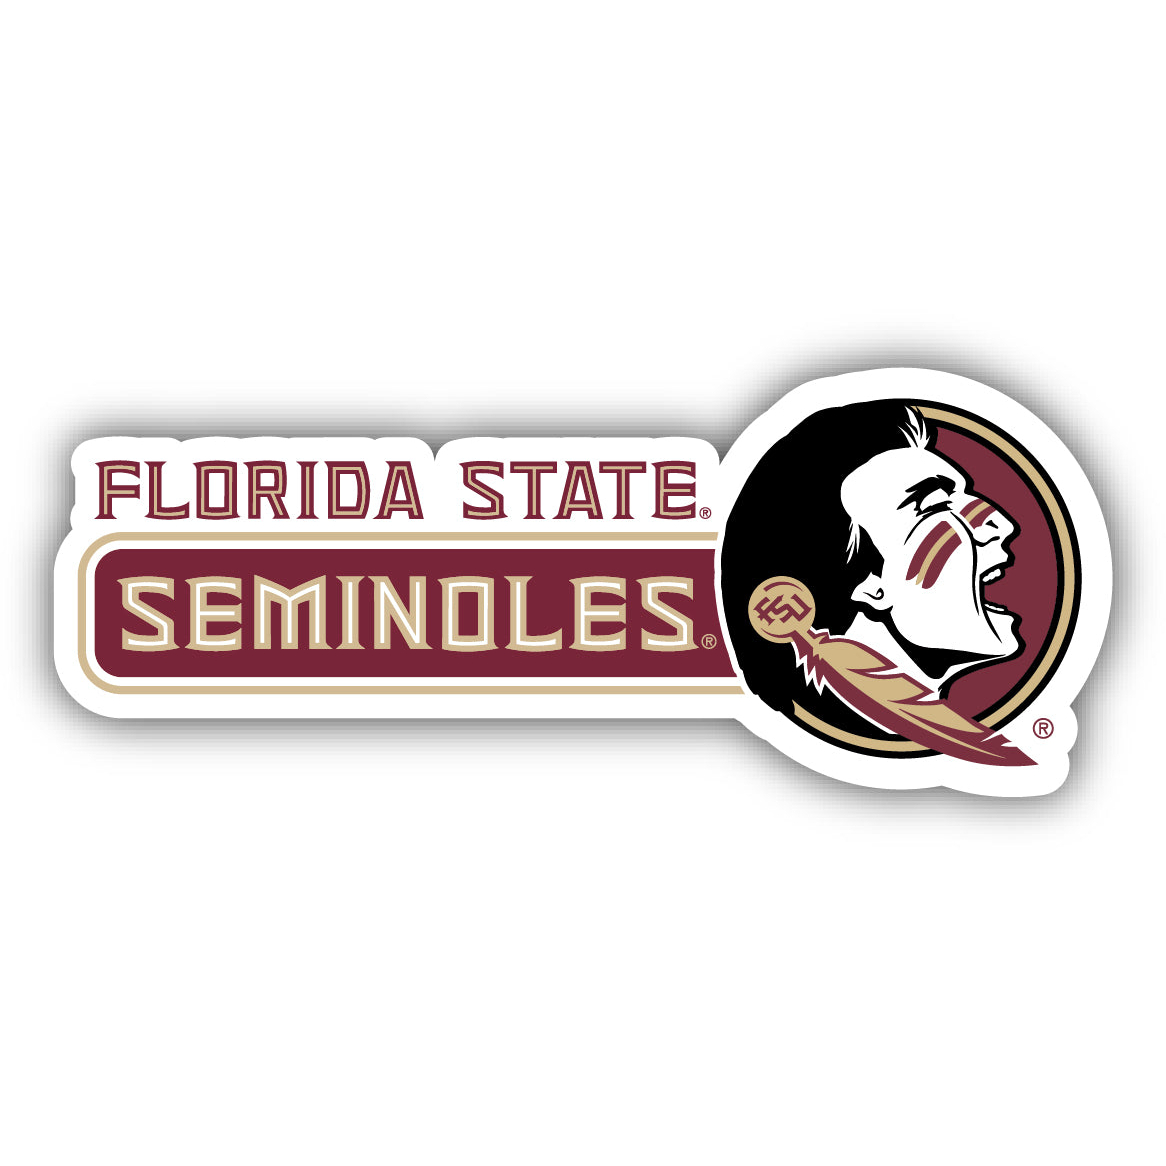 Florida State Seminoles 4 Inch Wide Colorful Vinyl Decal Sticker